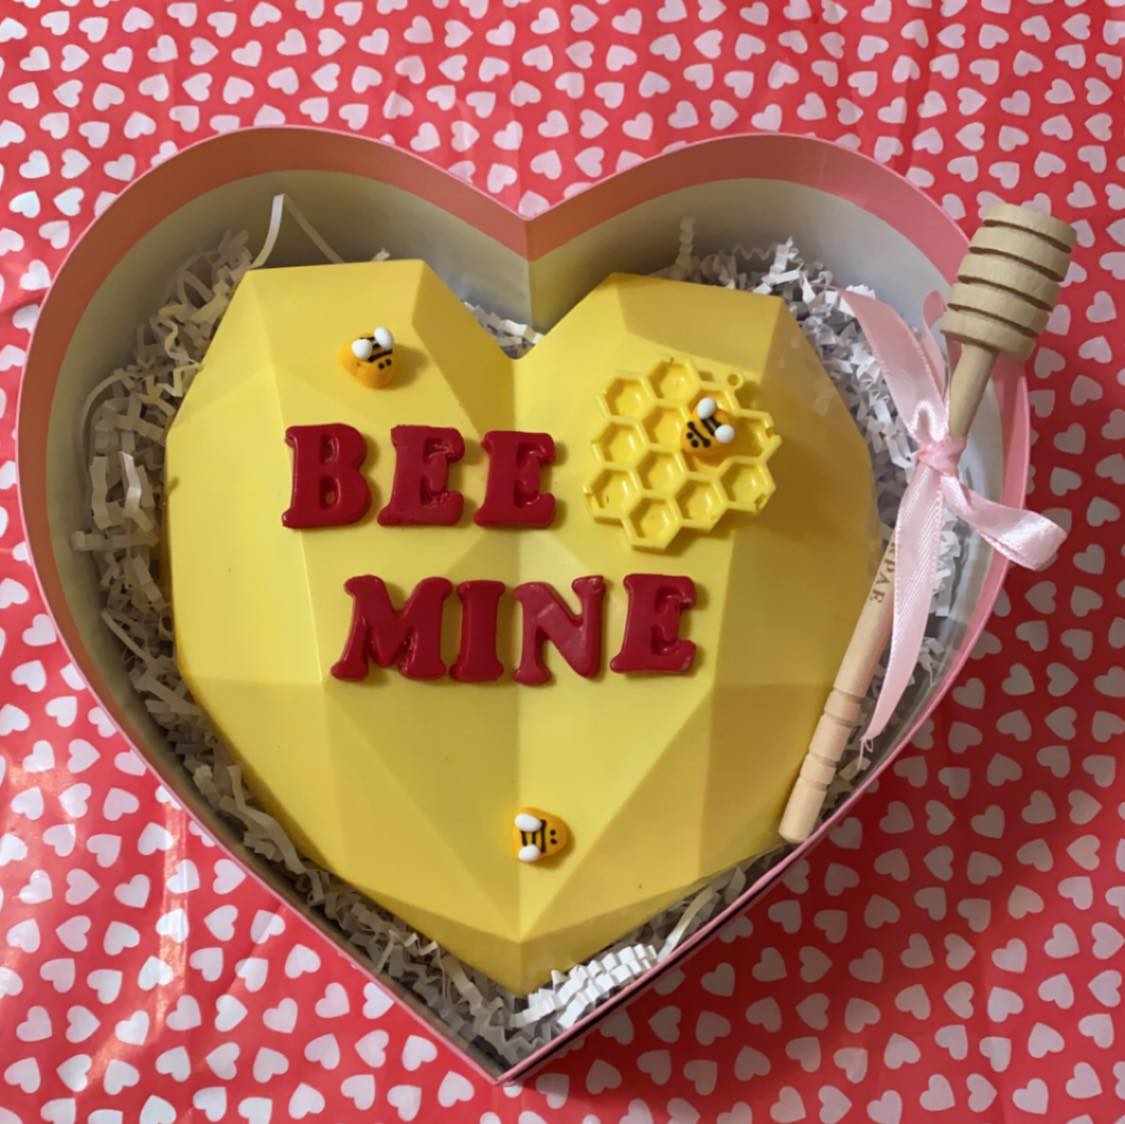 heart shaped cake with lettering BEE MINE and honey bee decorations